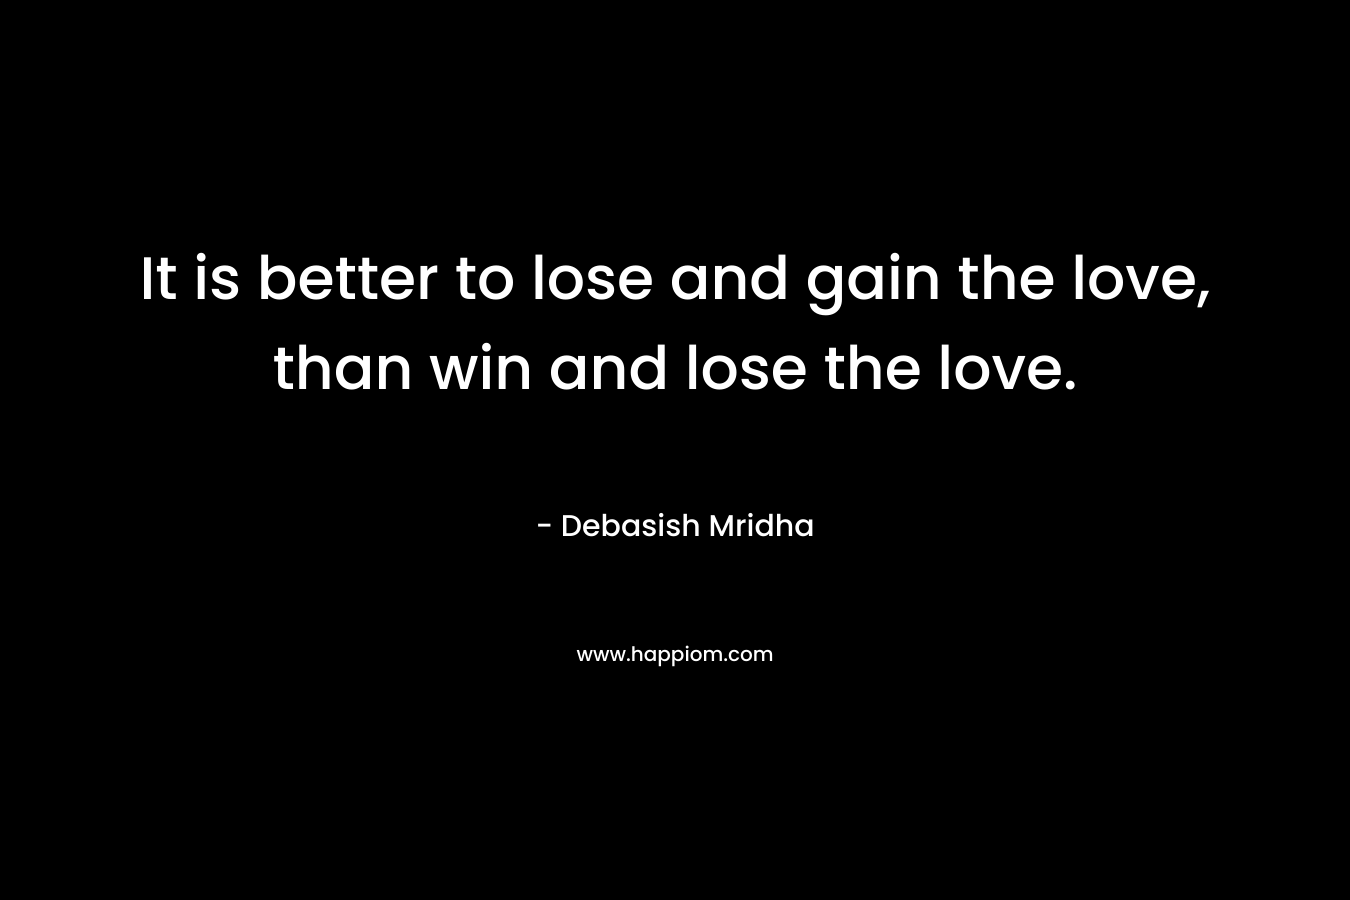 It is better to lose and gain the love, than win and lose the love.